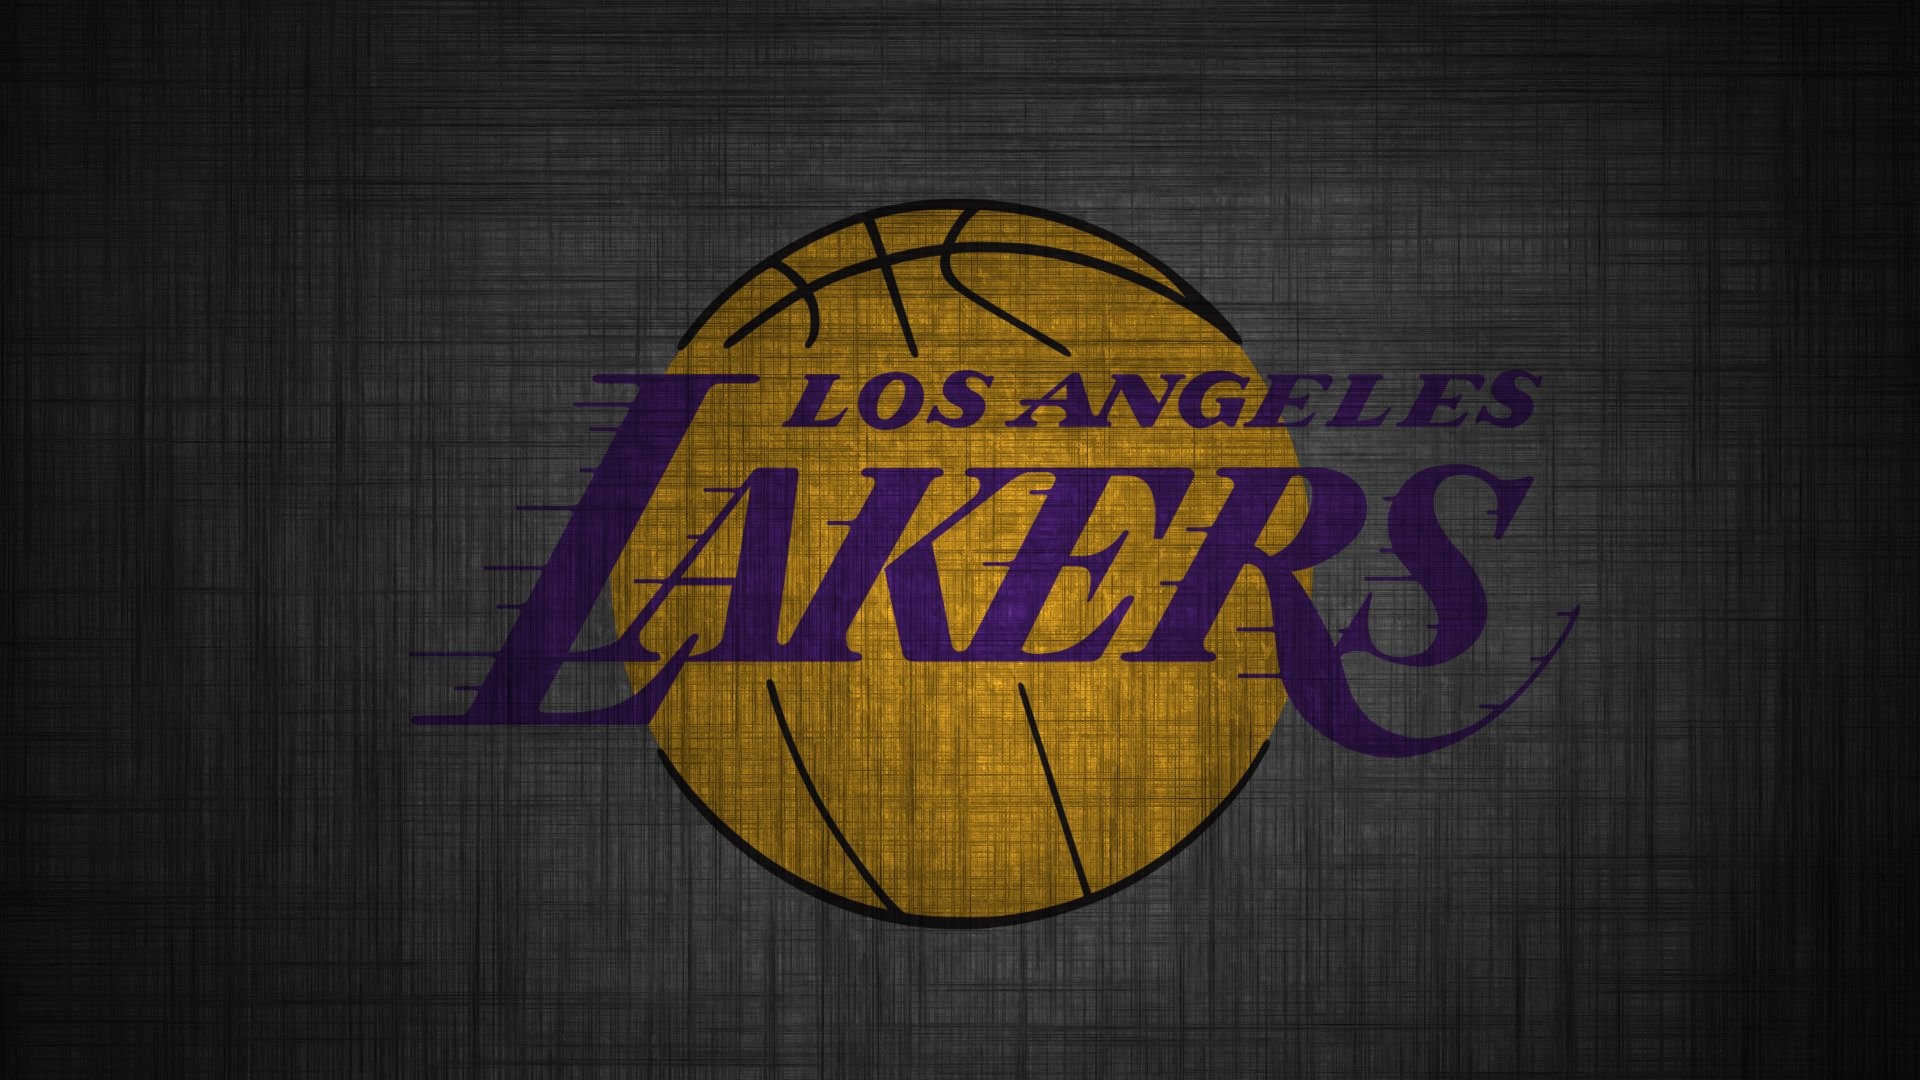 1920x1080 Iphone Los Angeles Lakers Wallpapers | Download Wallpaper | Pinterest |  Lakers wallpaper, Los angeles wallpaper and Wallpaper